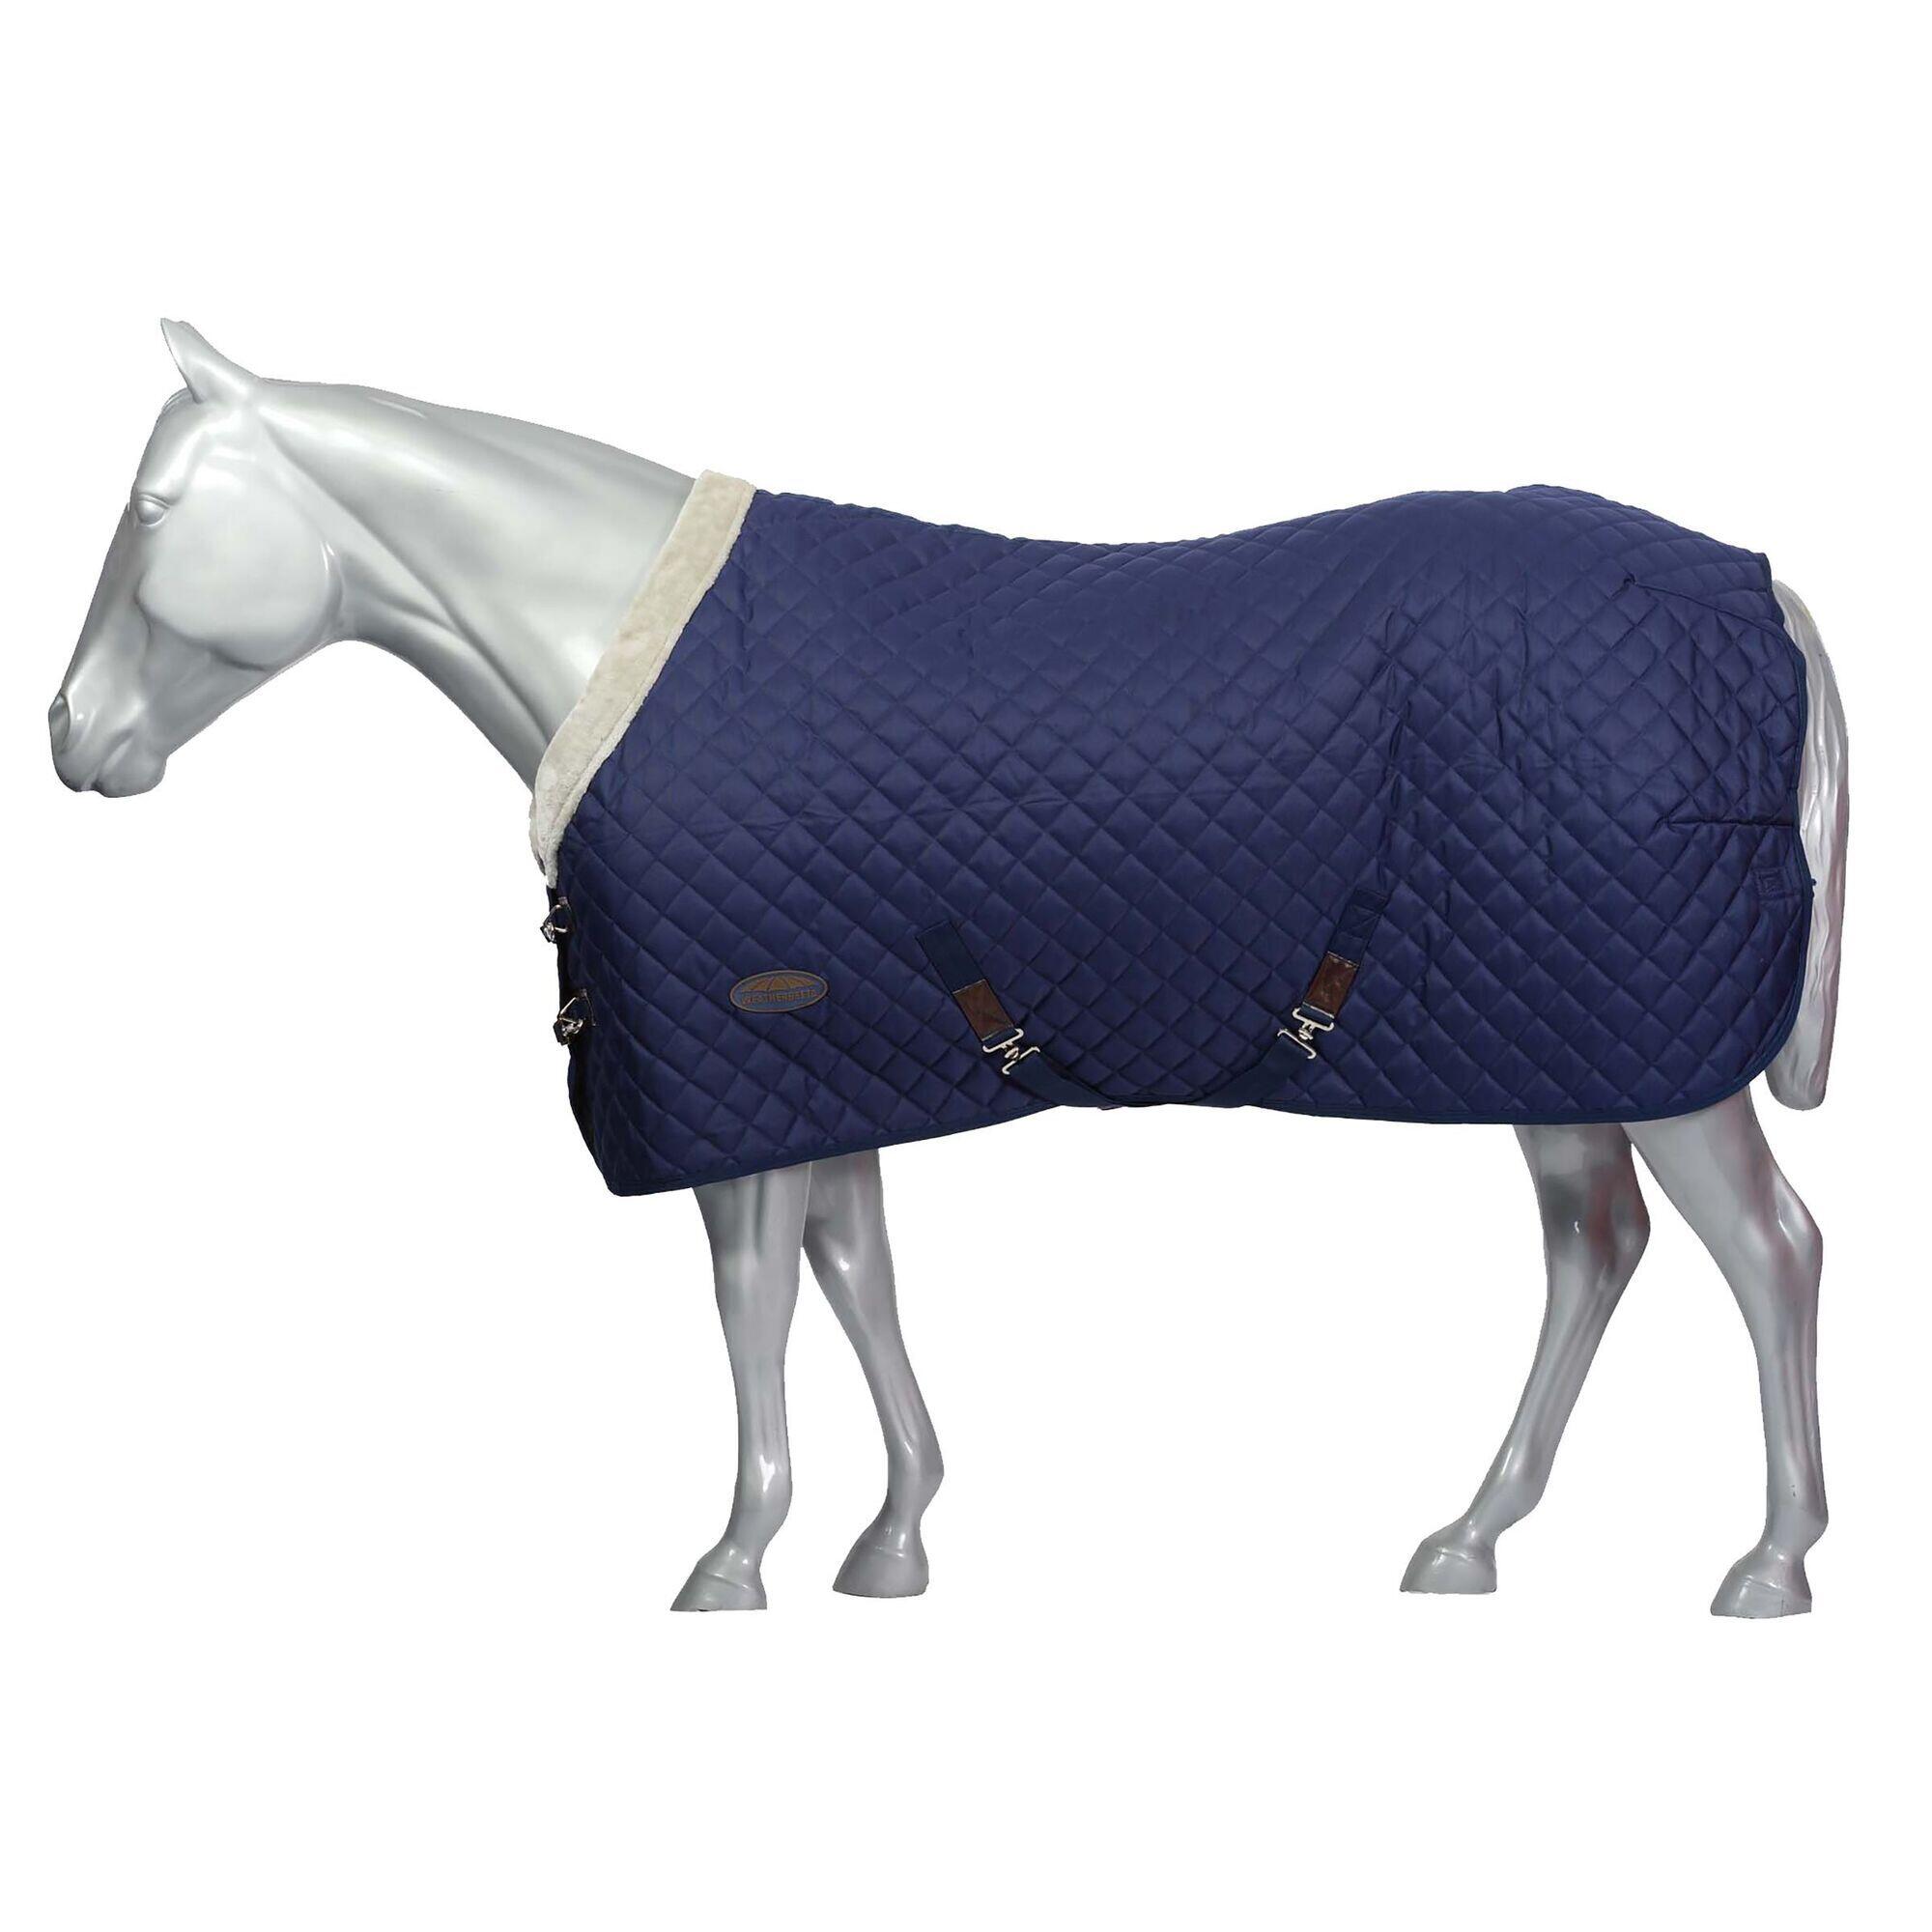 Comfitec Deluxe StandardNeck Quilted Midweight Horse Stable Rug (Navy) 1/4